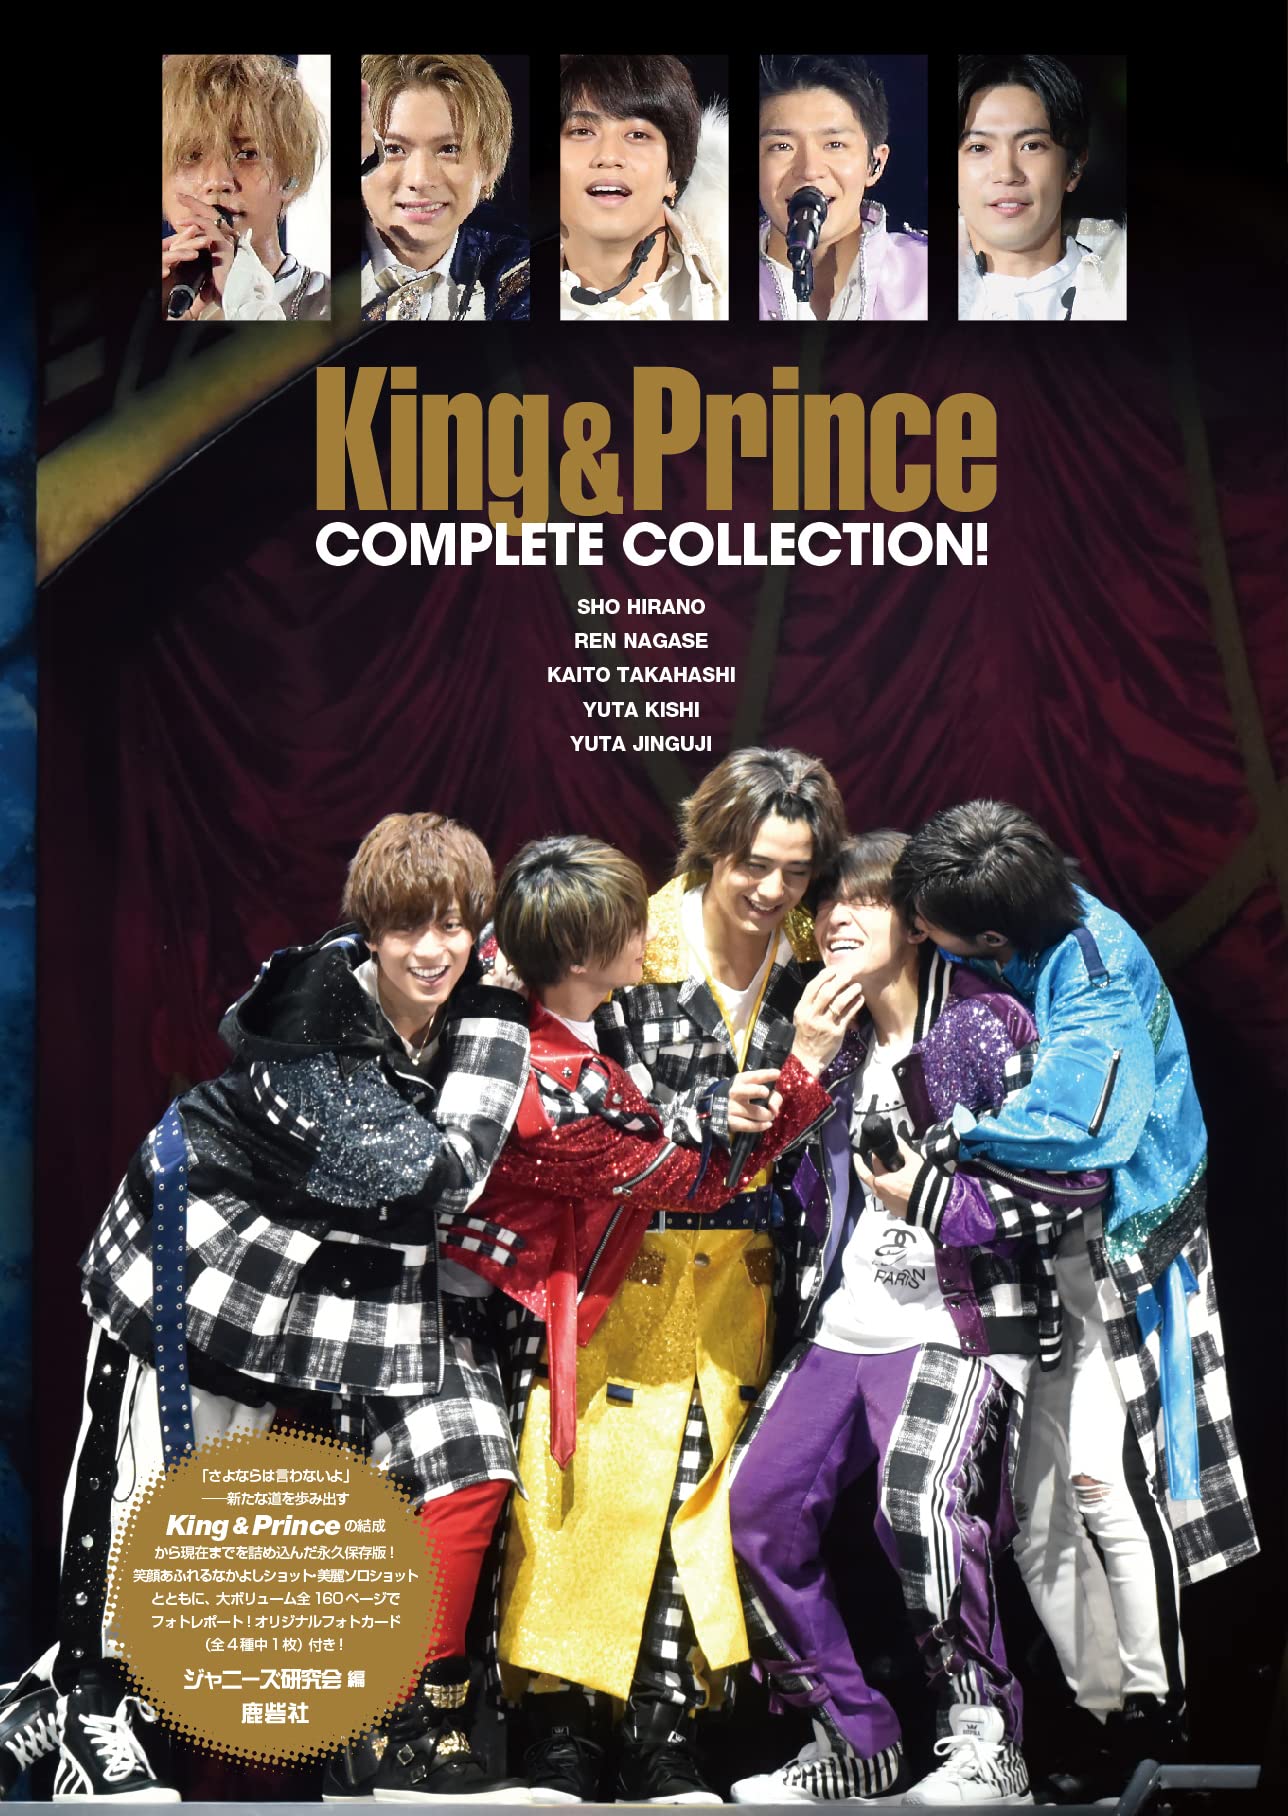 King & Prince COMPLETE COLLECTION!